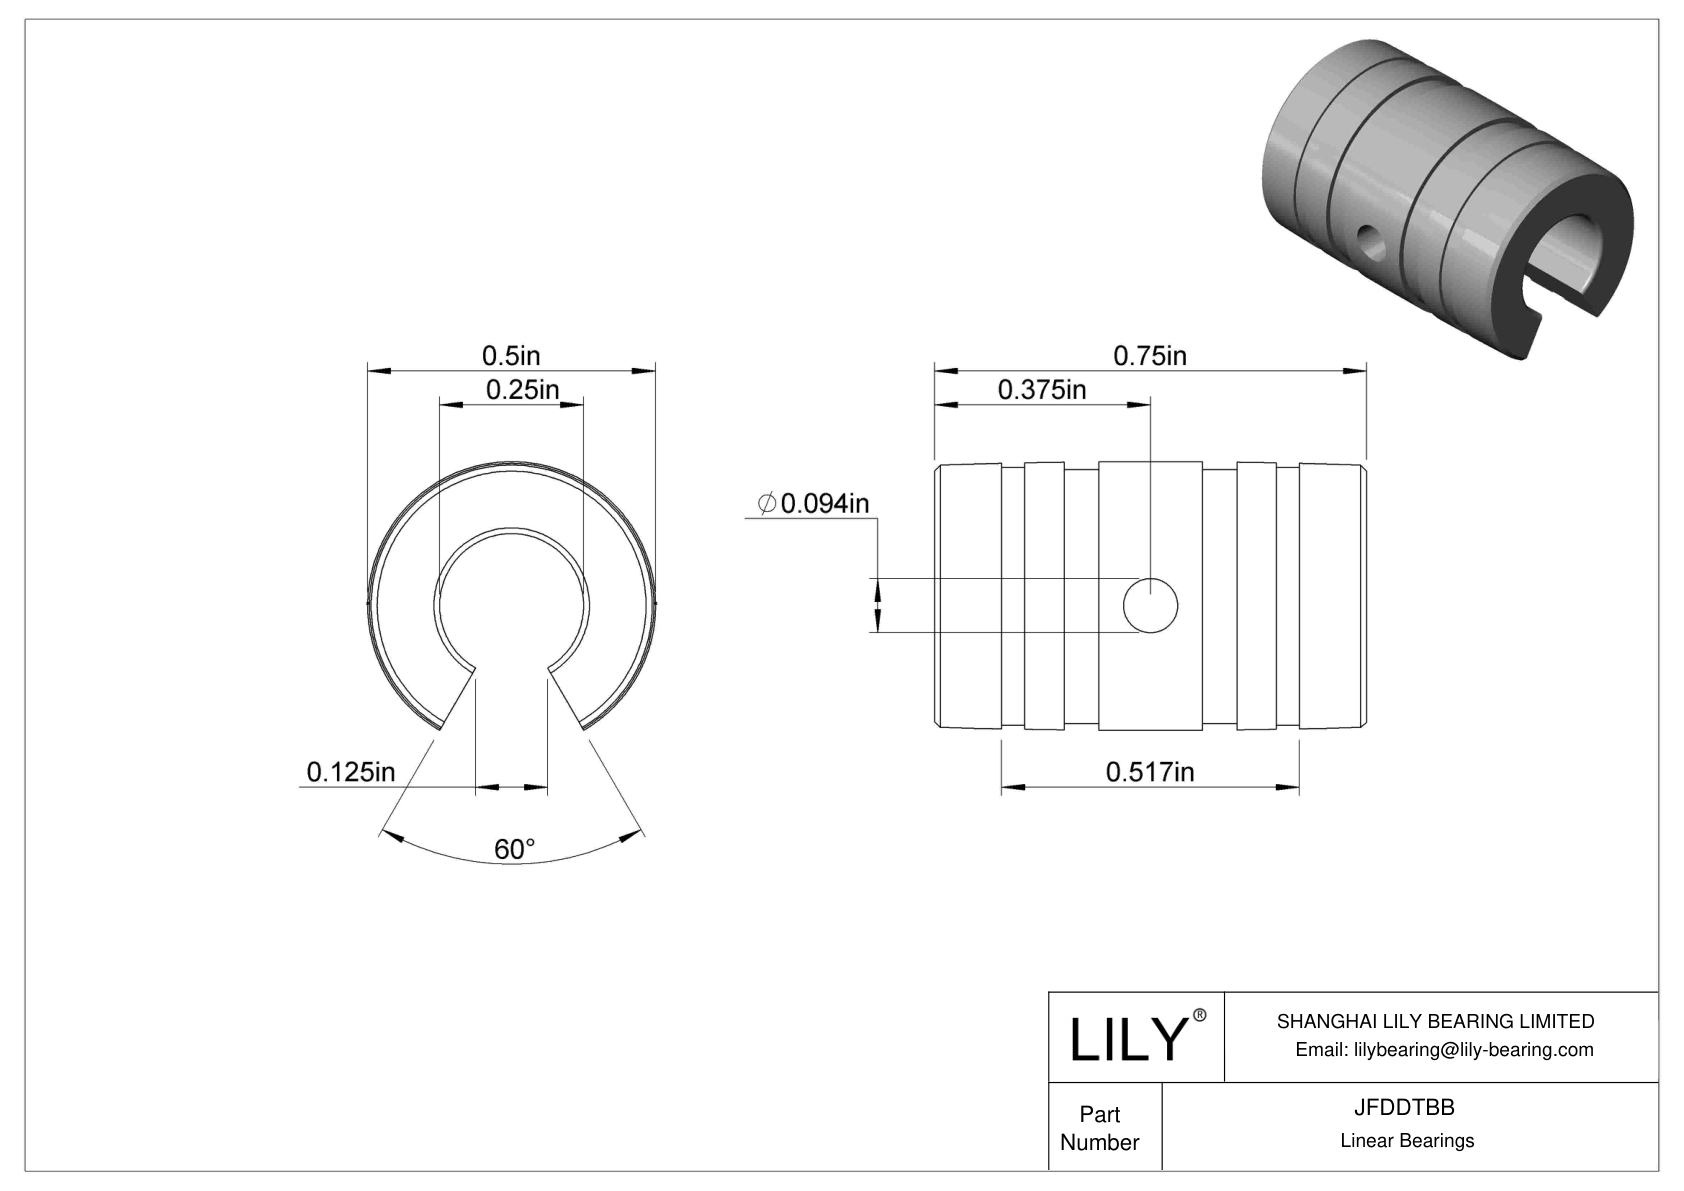 JFDDTBB Common Linear Sleeve Bearings for Support Rail Shafts cad drawing